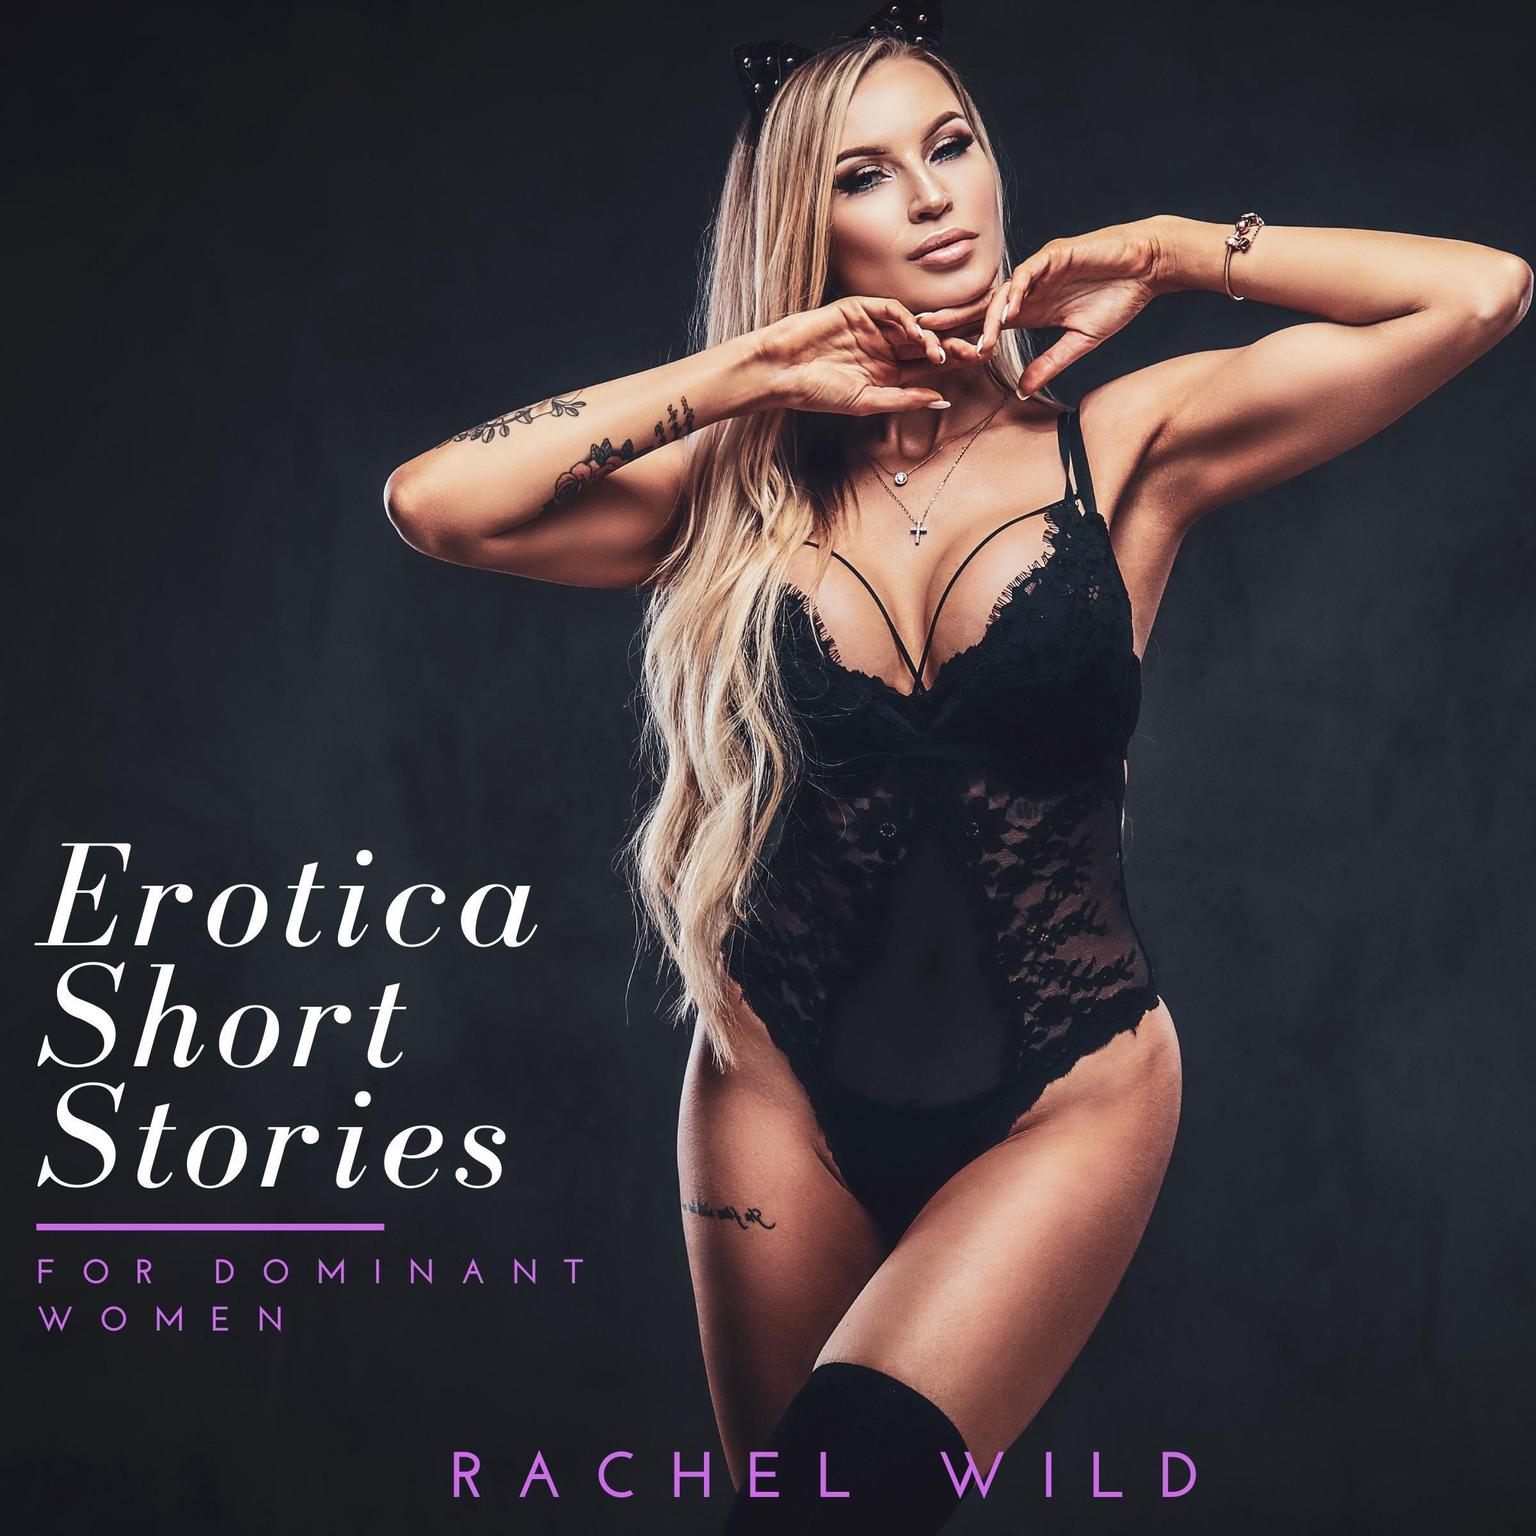 Erotica Short Stories For Dominant Women: A Compilation of extreme sinful Stories for Adults (Abridged): A Compilation of Stories for Adults of Extreme Satisfaction Audiobook, by Ivana Swirl